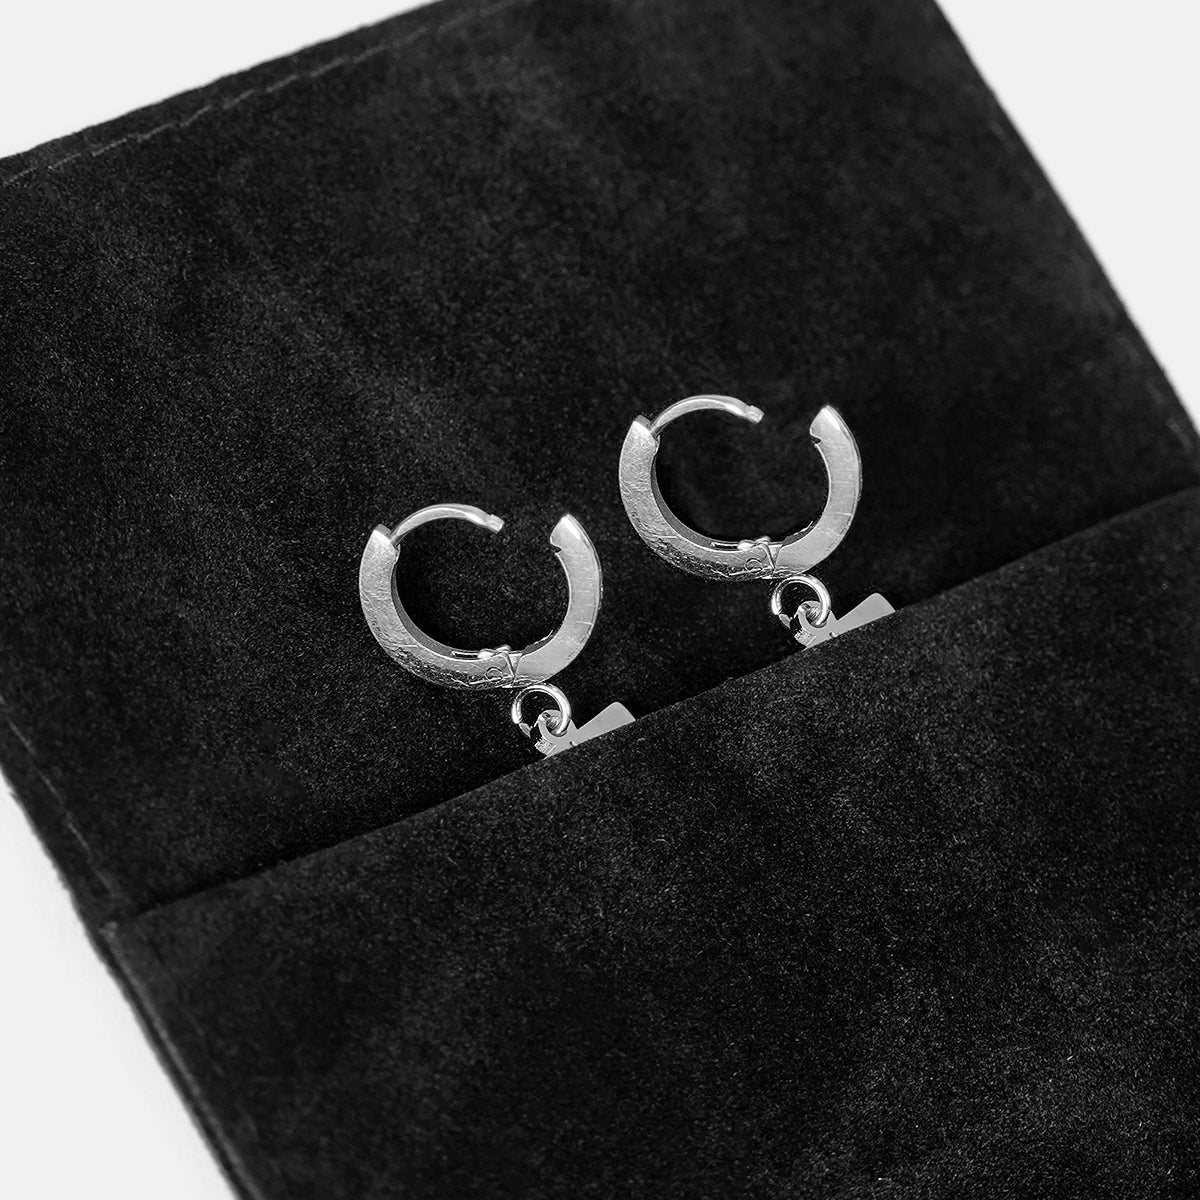 22 Number Earring - Stainless Steel